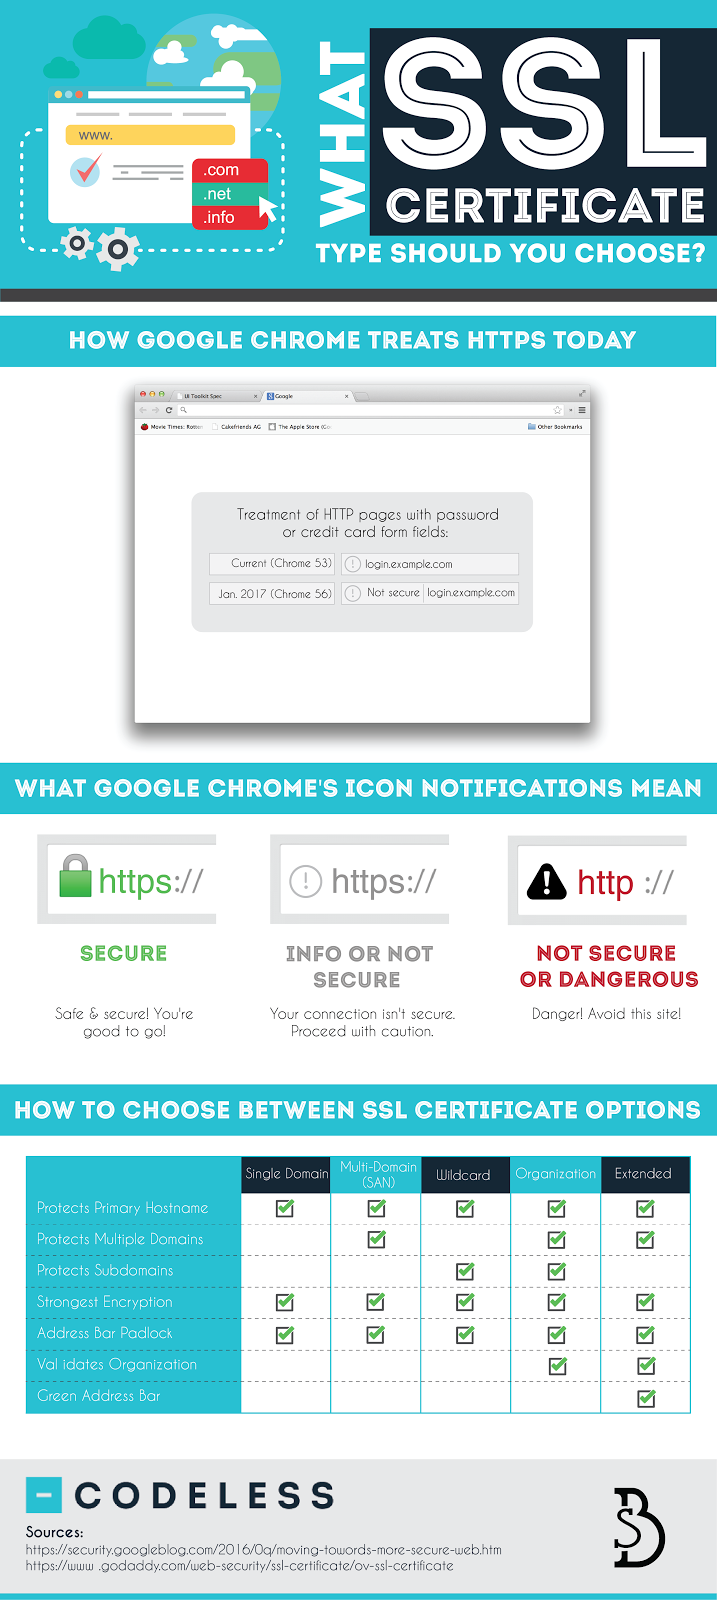 What SSL Certificate Type Should You Choose Infographic